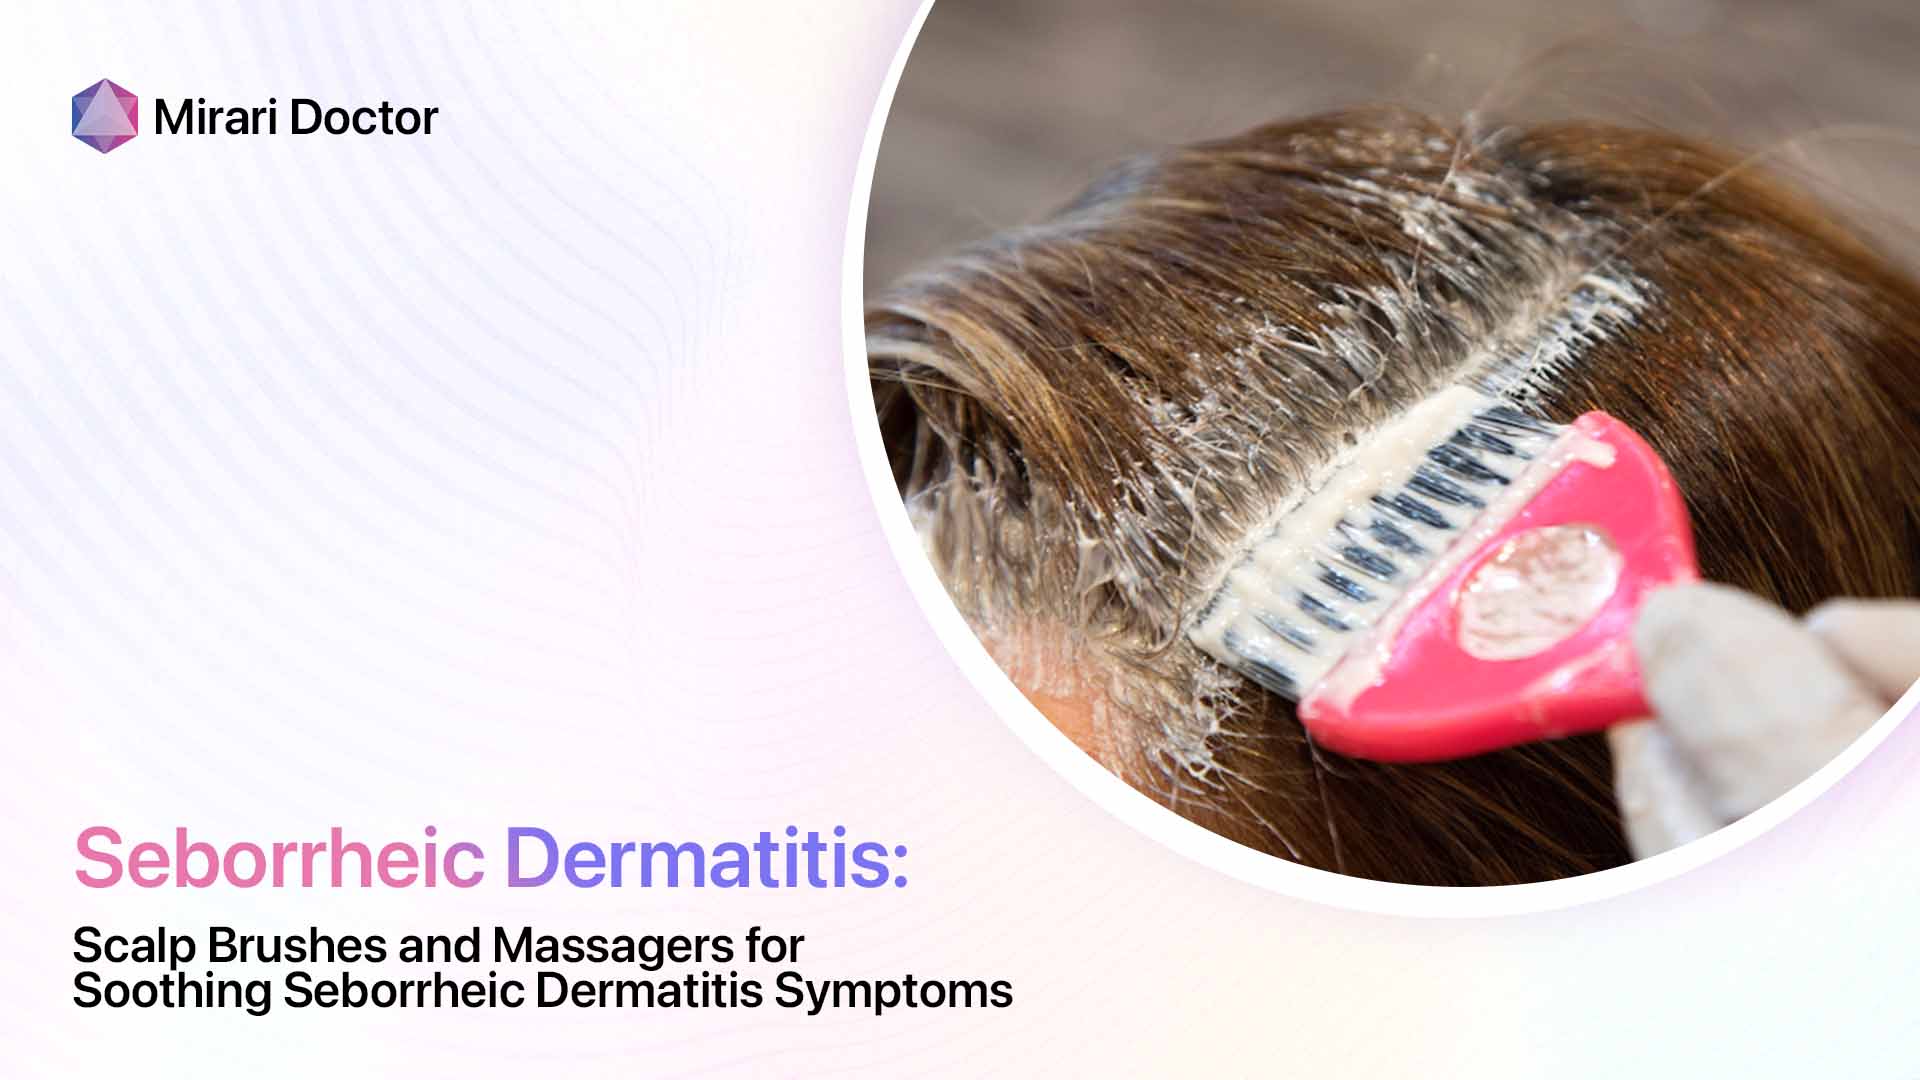 Featured image for “Scalp Brushes and Massagers for Soothing Seborrheic Dermatitis Symptoms”